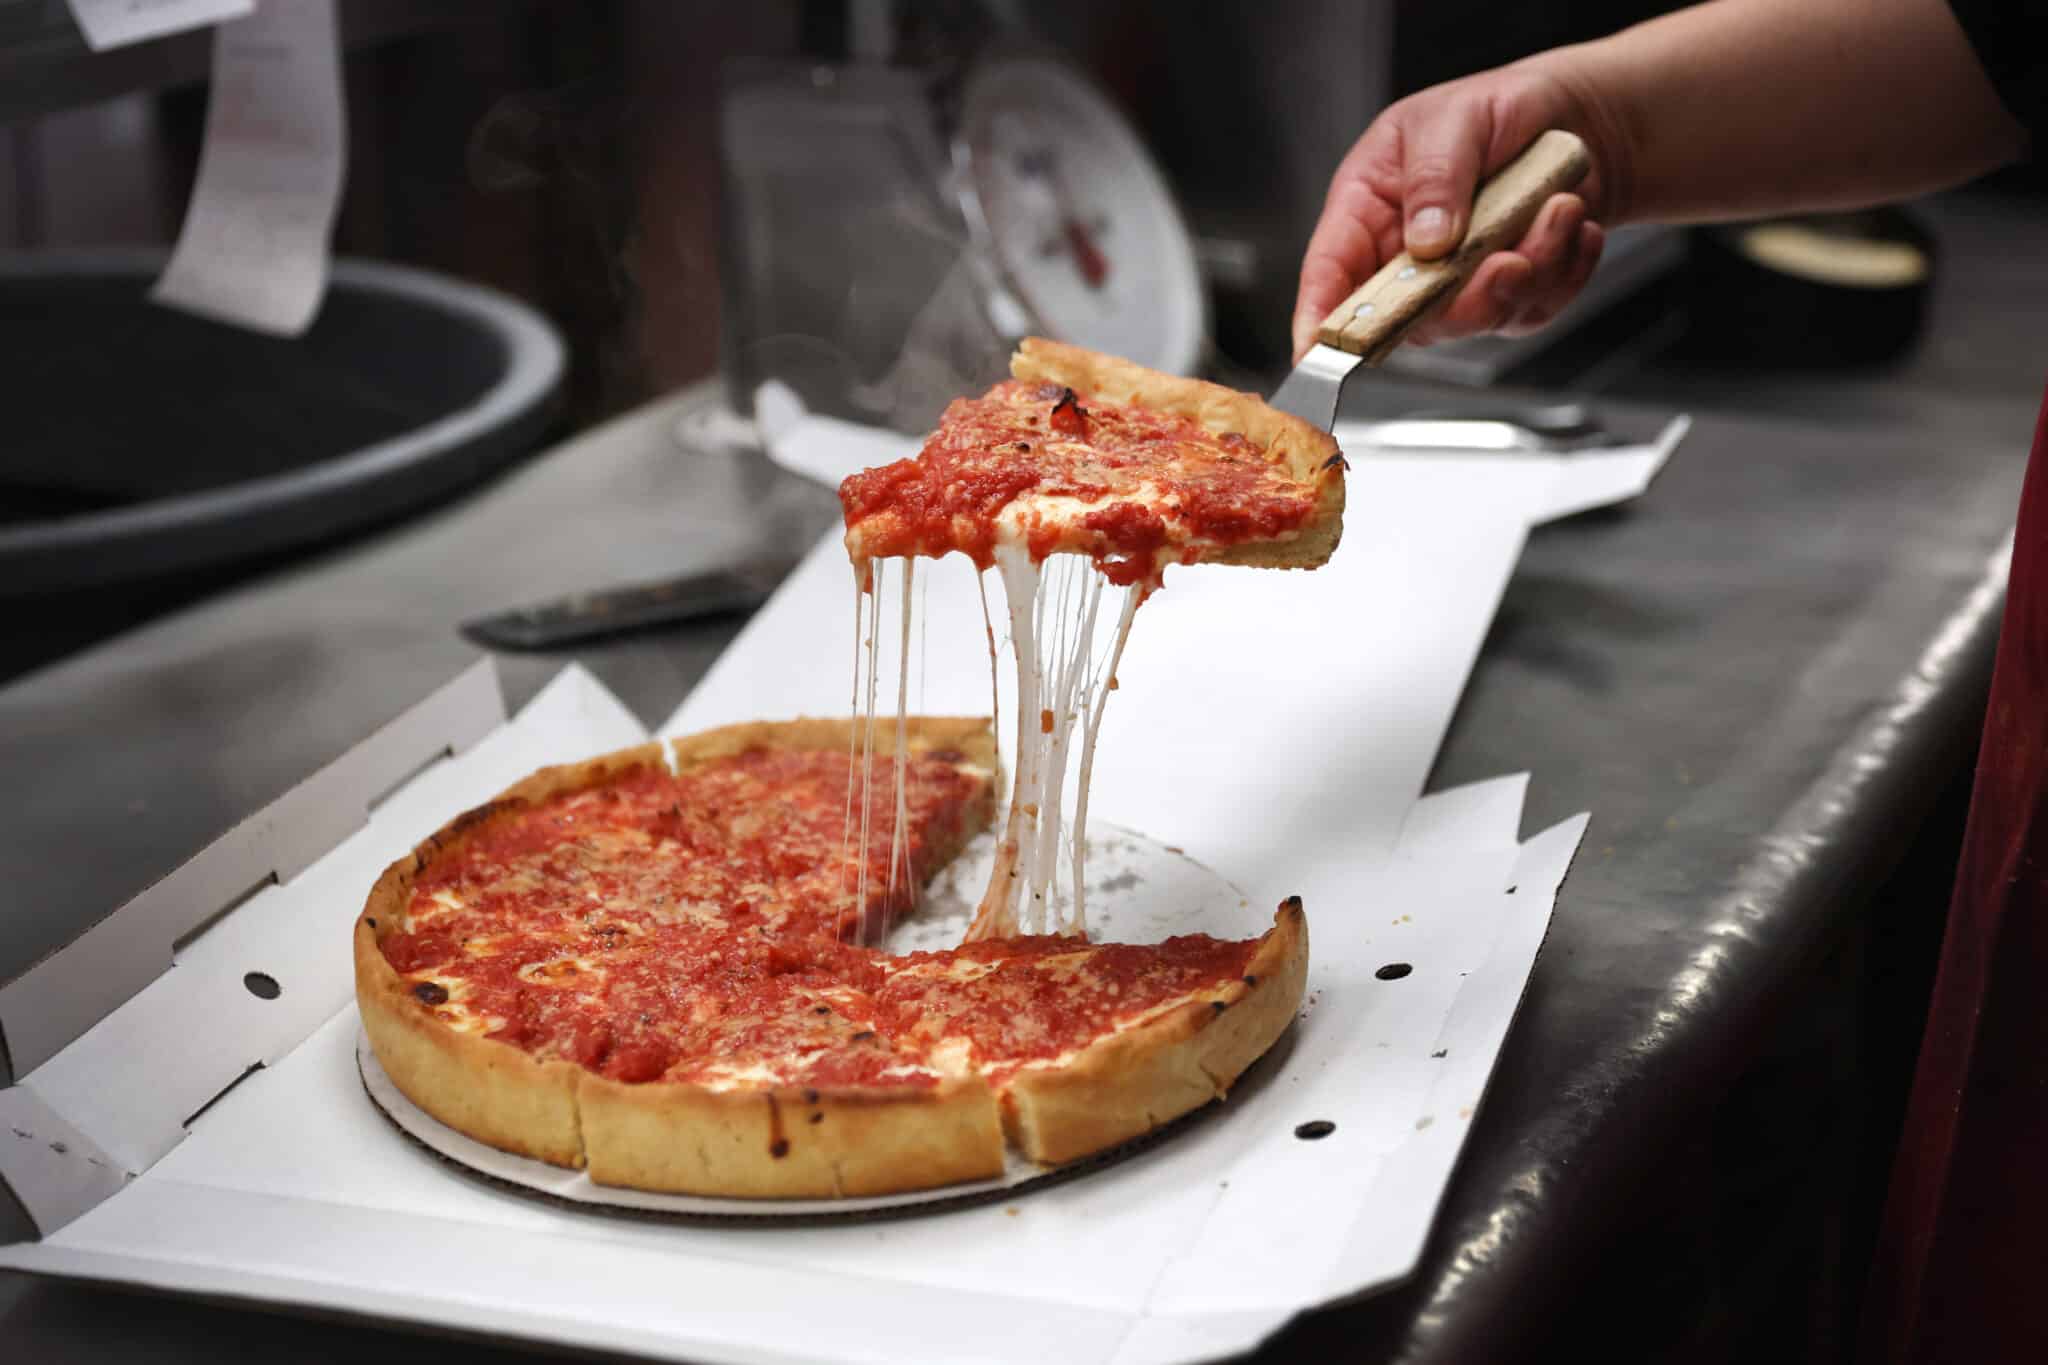 CHICAGO, ILLINOIS - MARCH 31: A worker prepares a Chicago-style deep dish pizza at a Lou Malnati's restaurant on March 31, 2022 in Chicago, Illinois. Restaurants, like the family-owned Lou Malnati's, have been hit by rising commodities prices such as wheat, which hit a record high after the start of the war in Ukraine.   (Photo Illustration by Scott Olson/Getty Images)